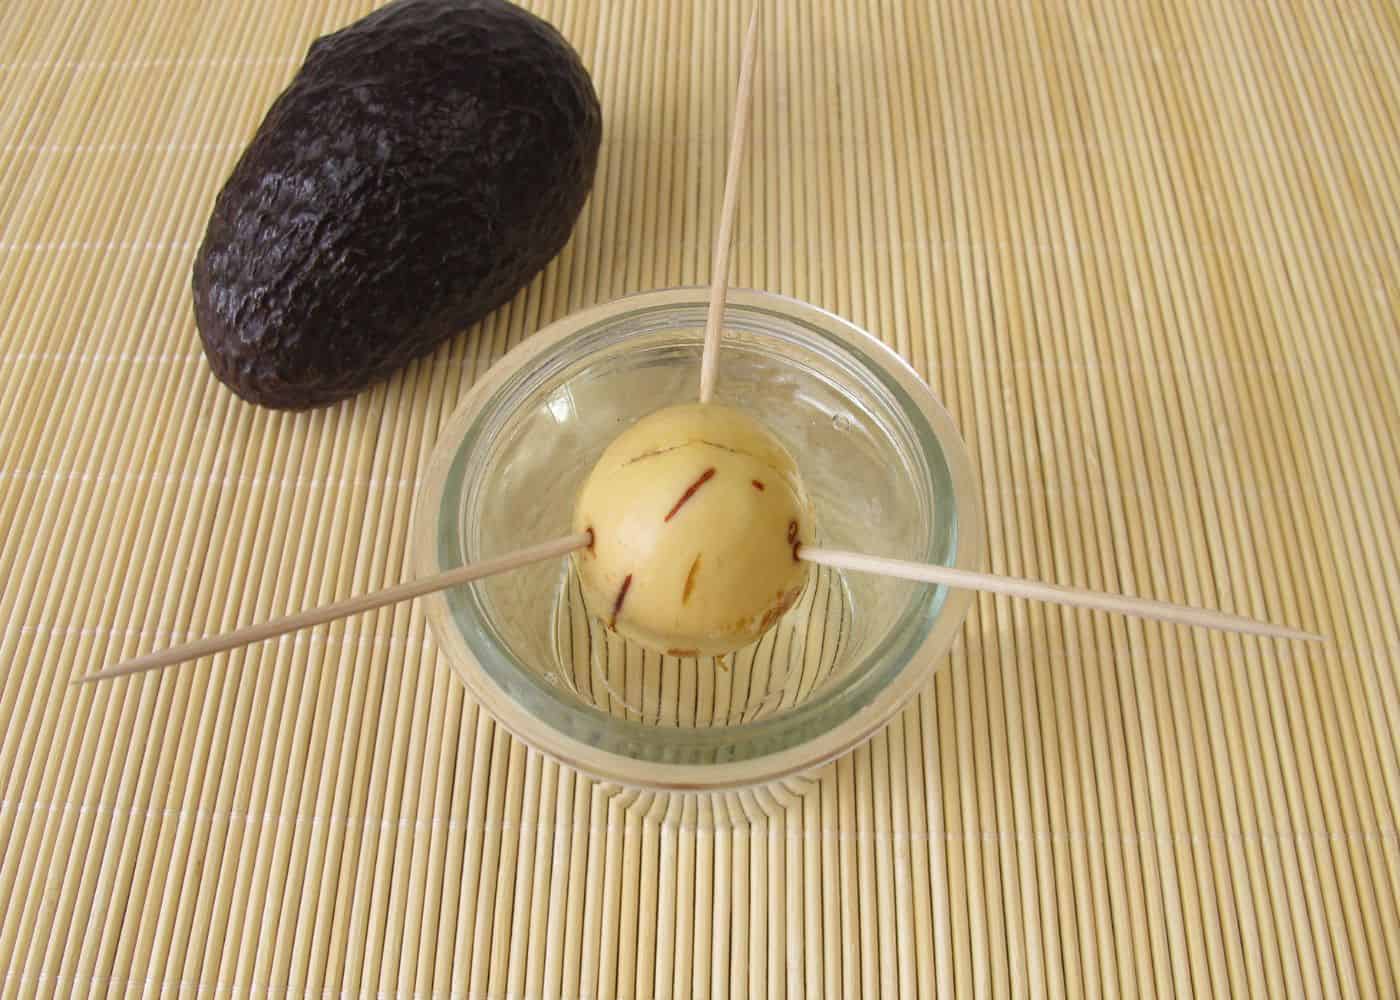 Avocado seed sprouting